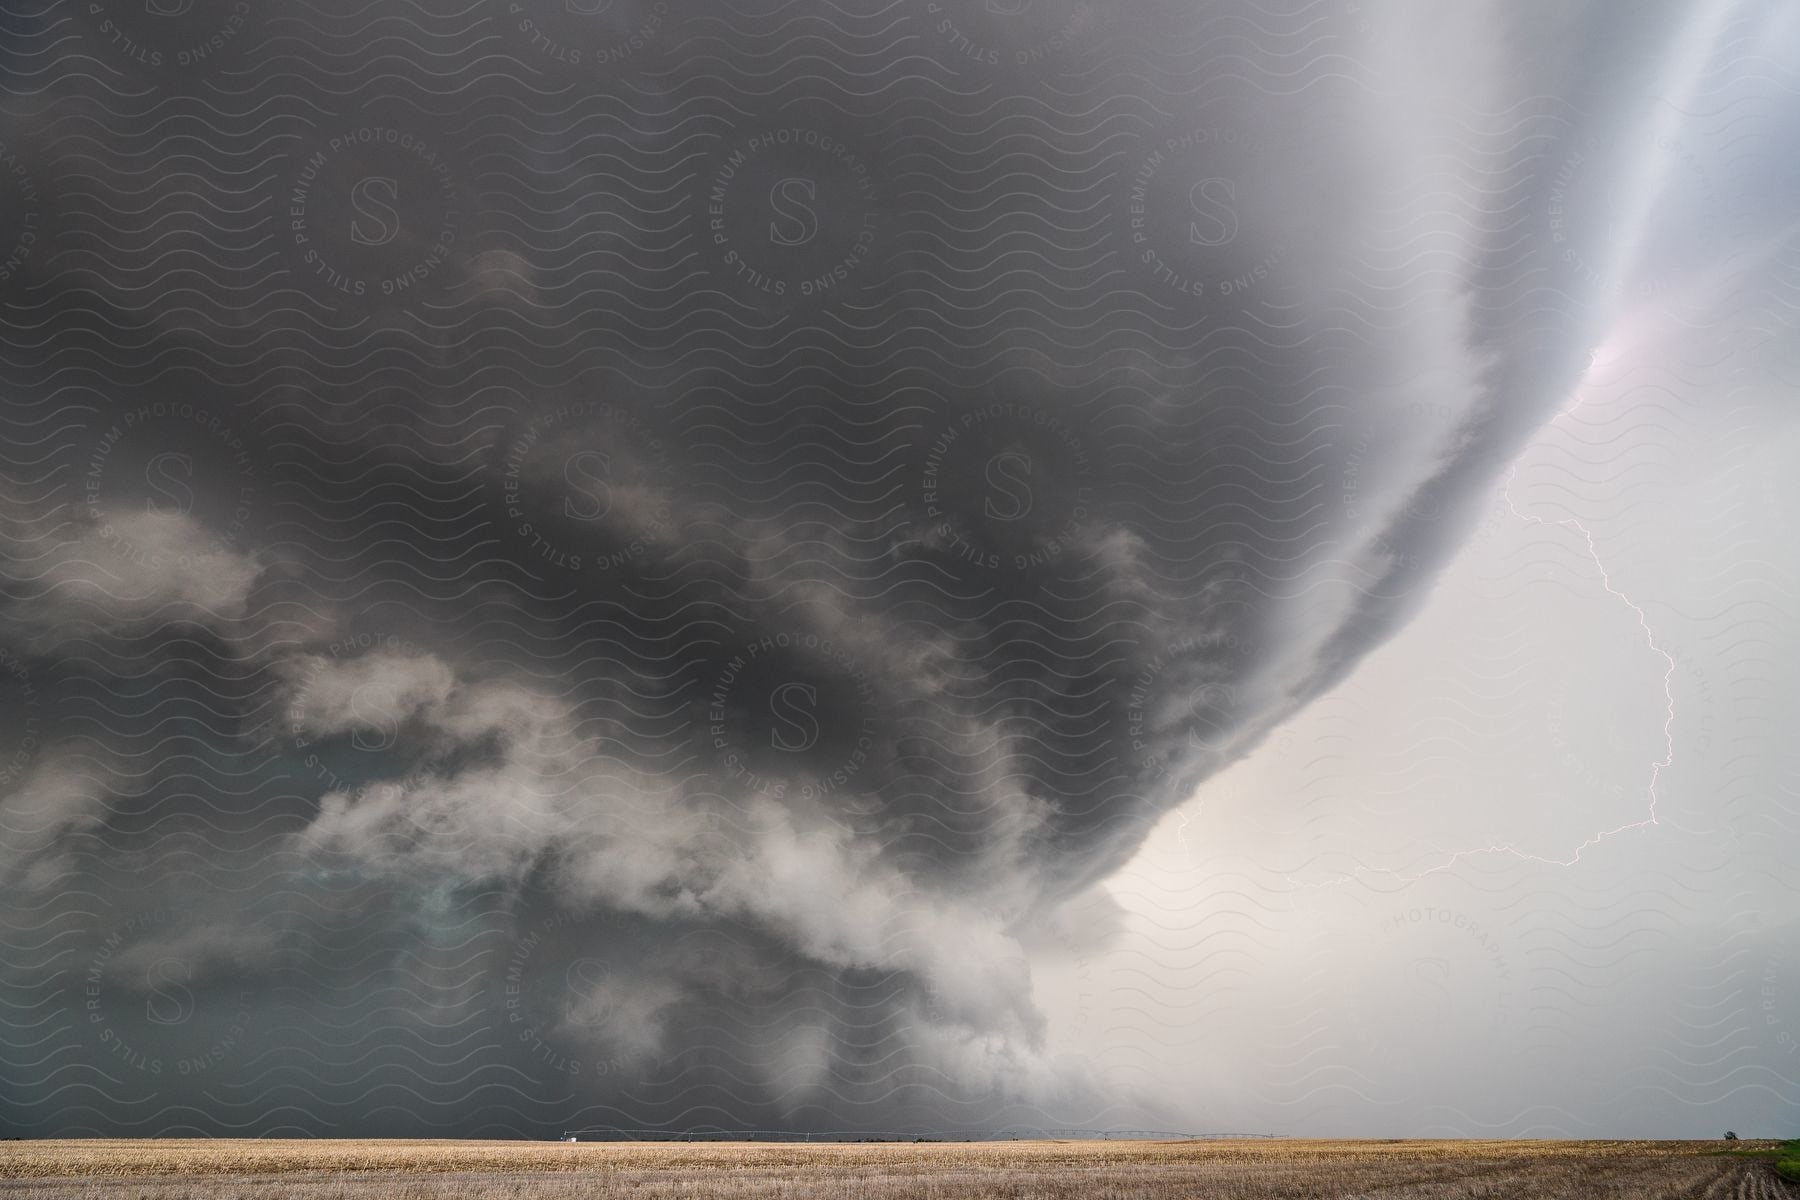 A dark supercell storm moves over rural farmland with lightning in the air